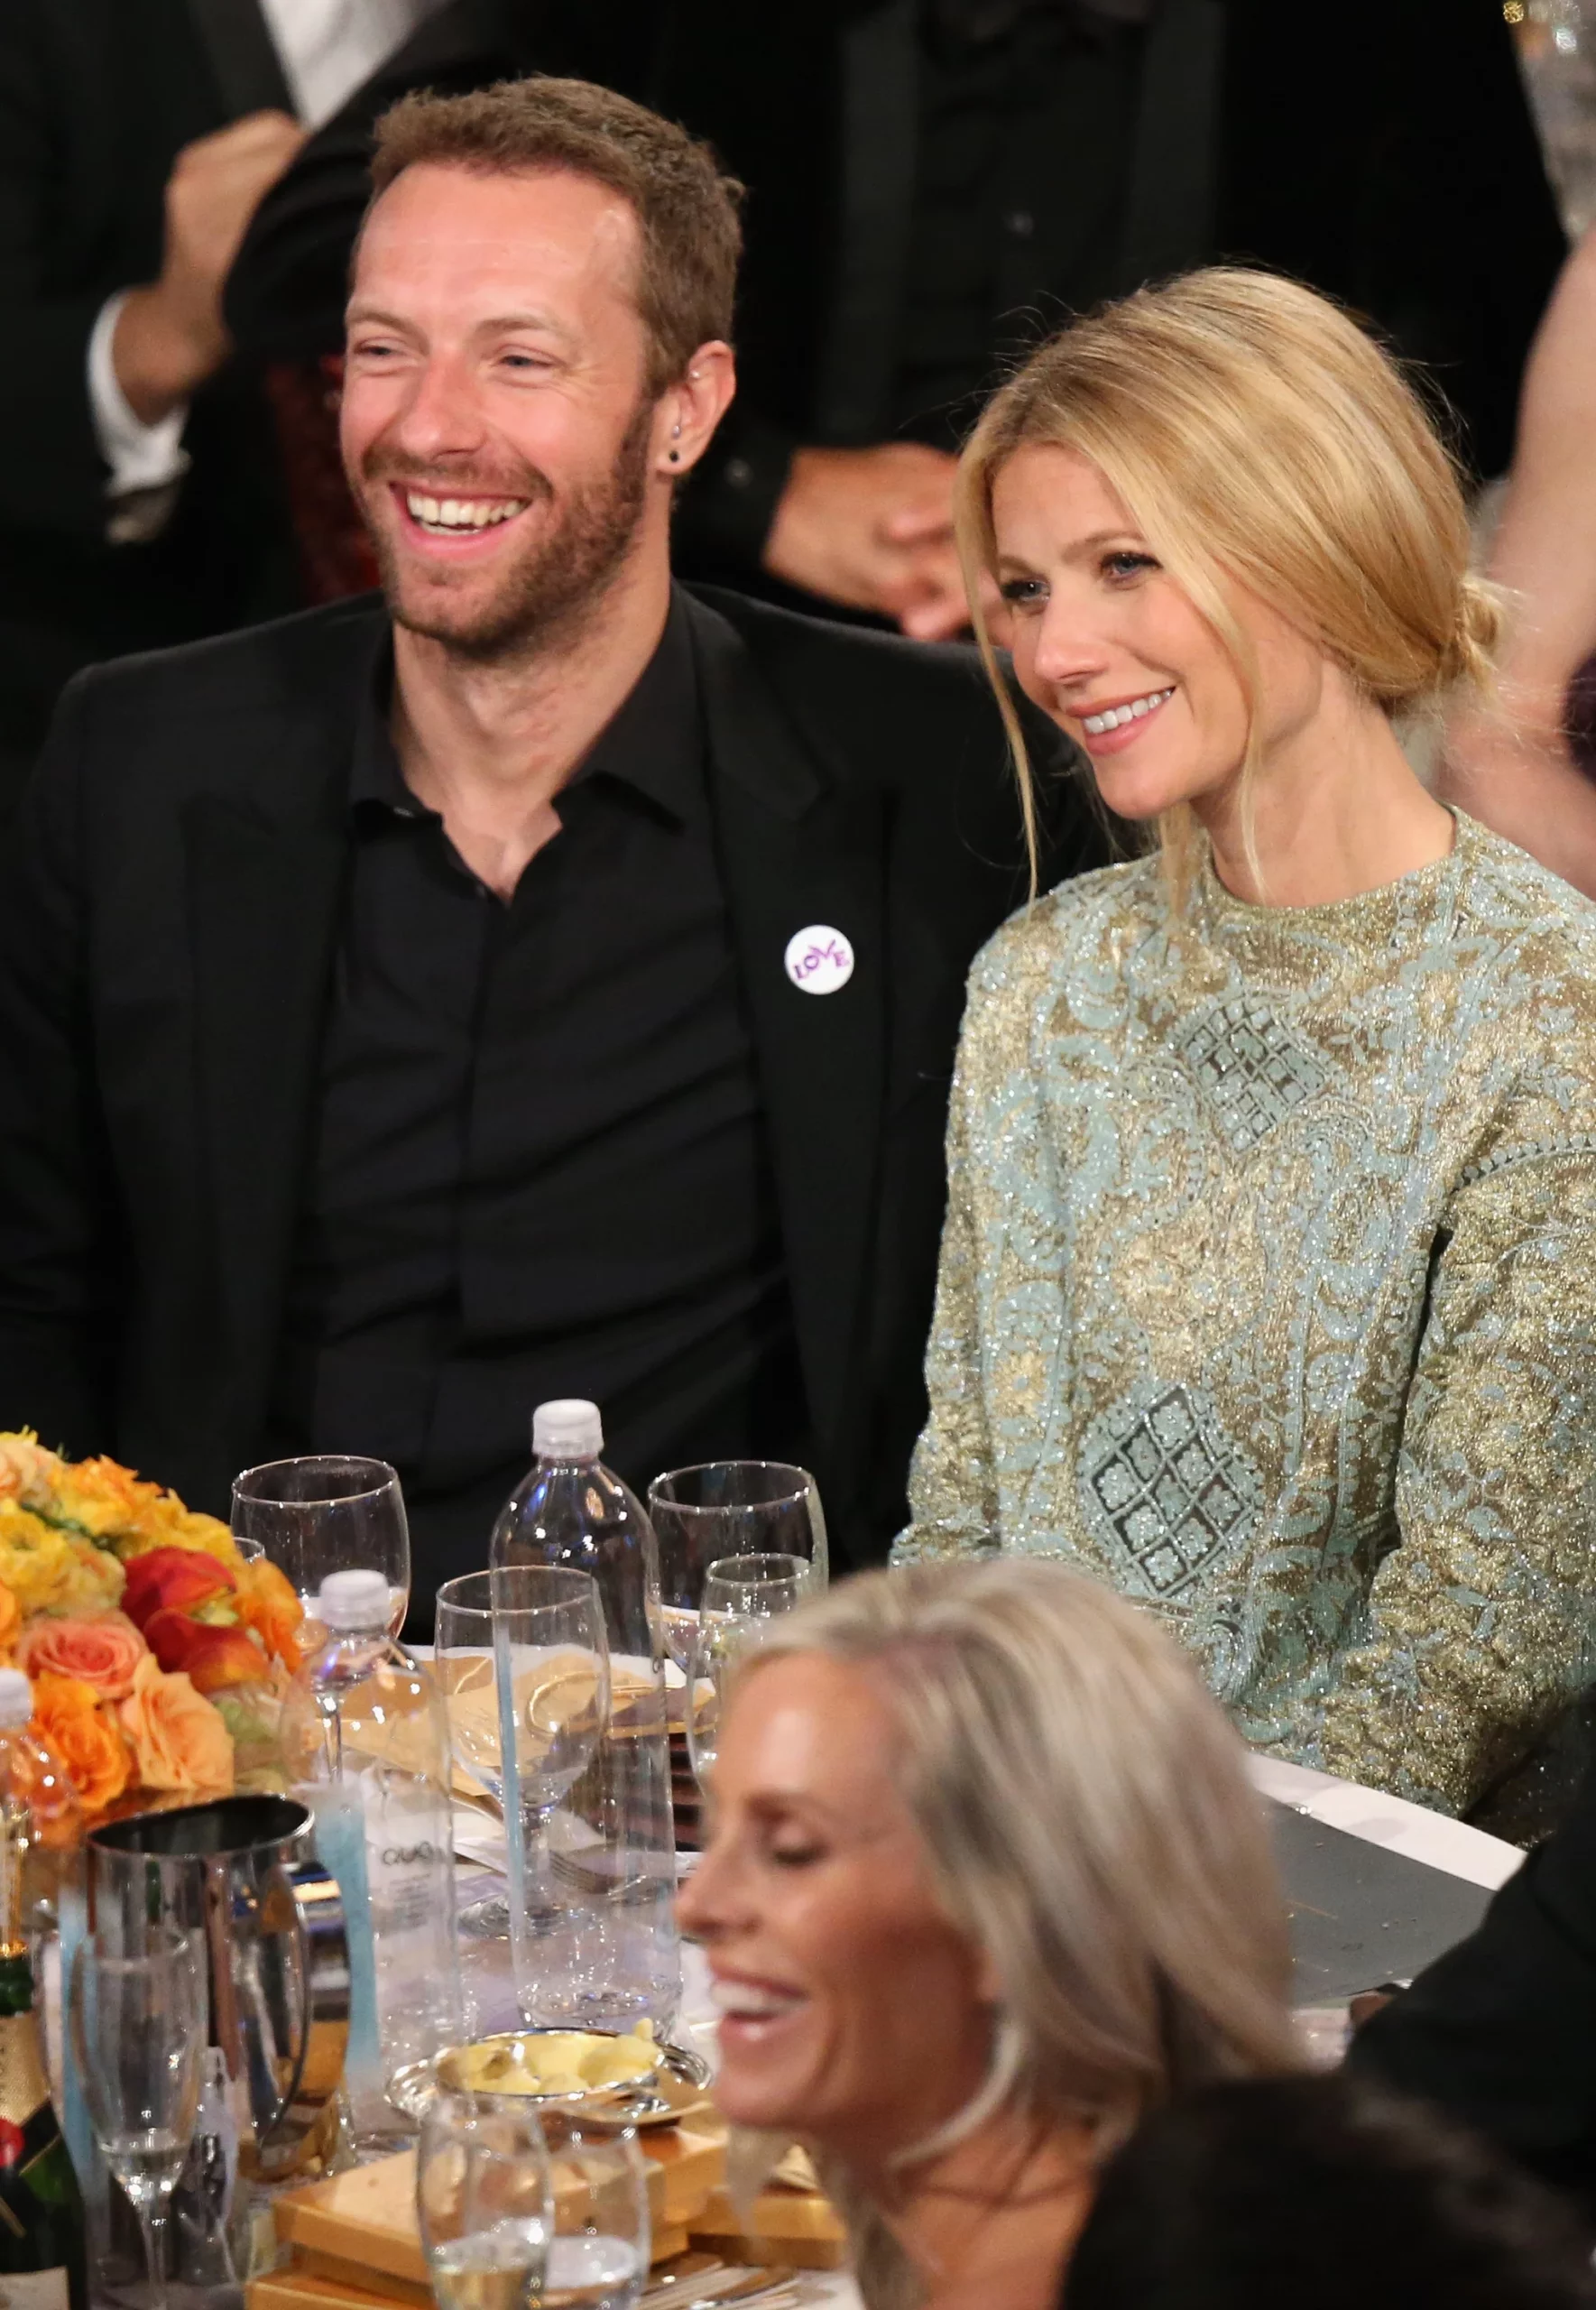 Gwyneth Paltrow and Chris Martin open relationship